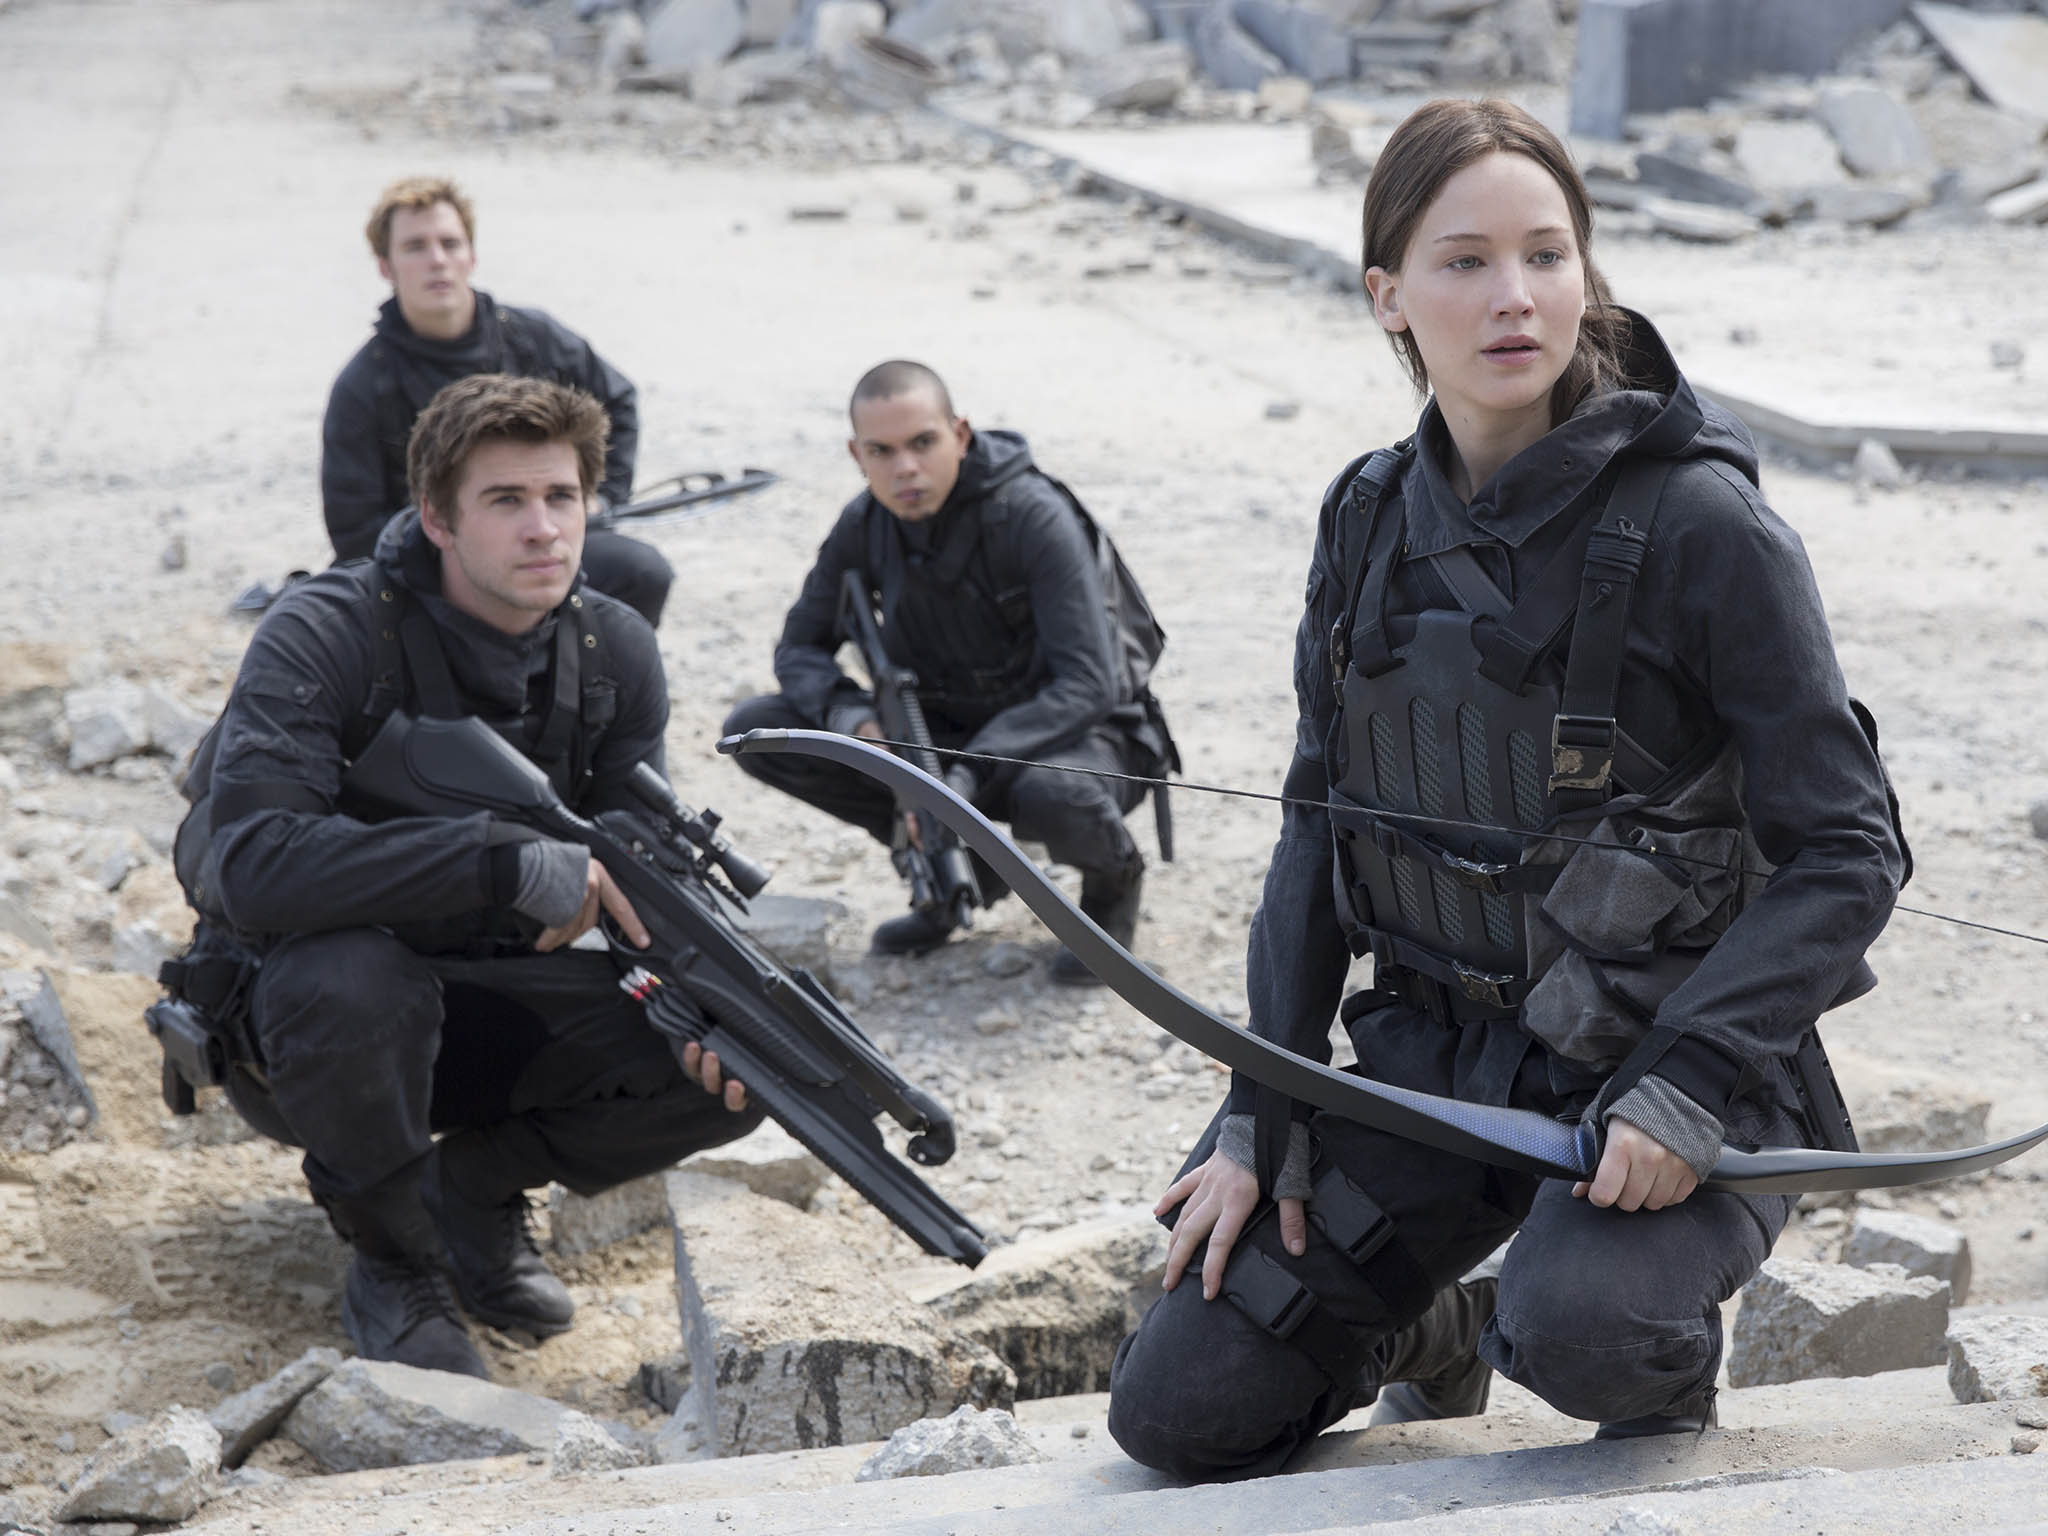 Liam Hemsworth with Jennifer Lawrence in ‘The Hunger Games: Mockingjay – Part 2’